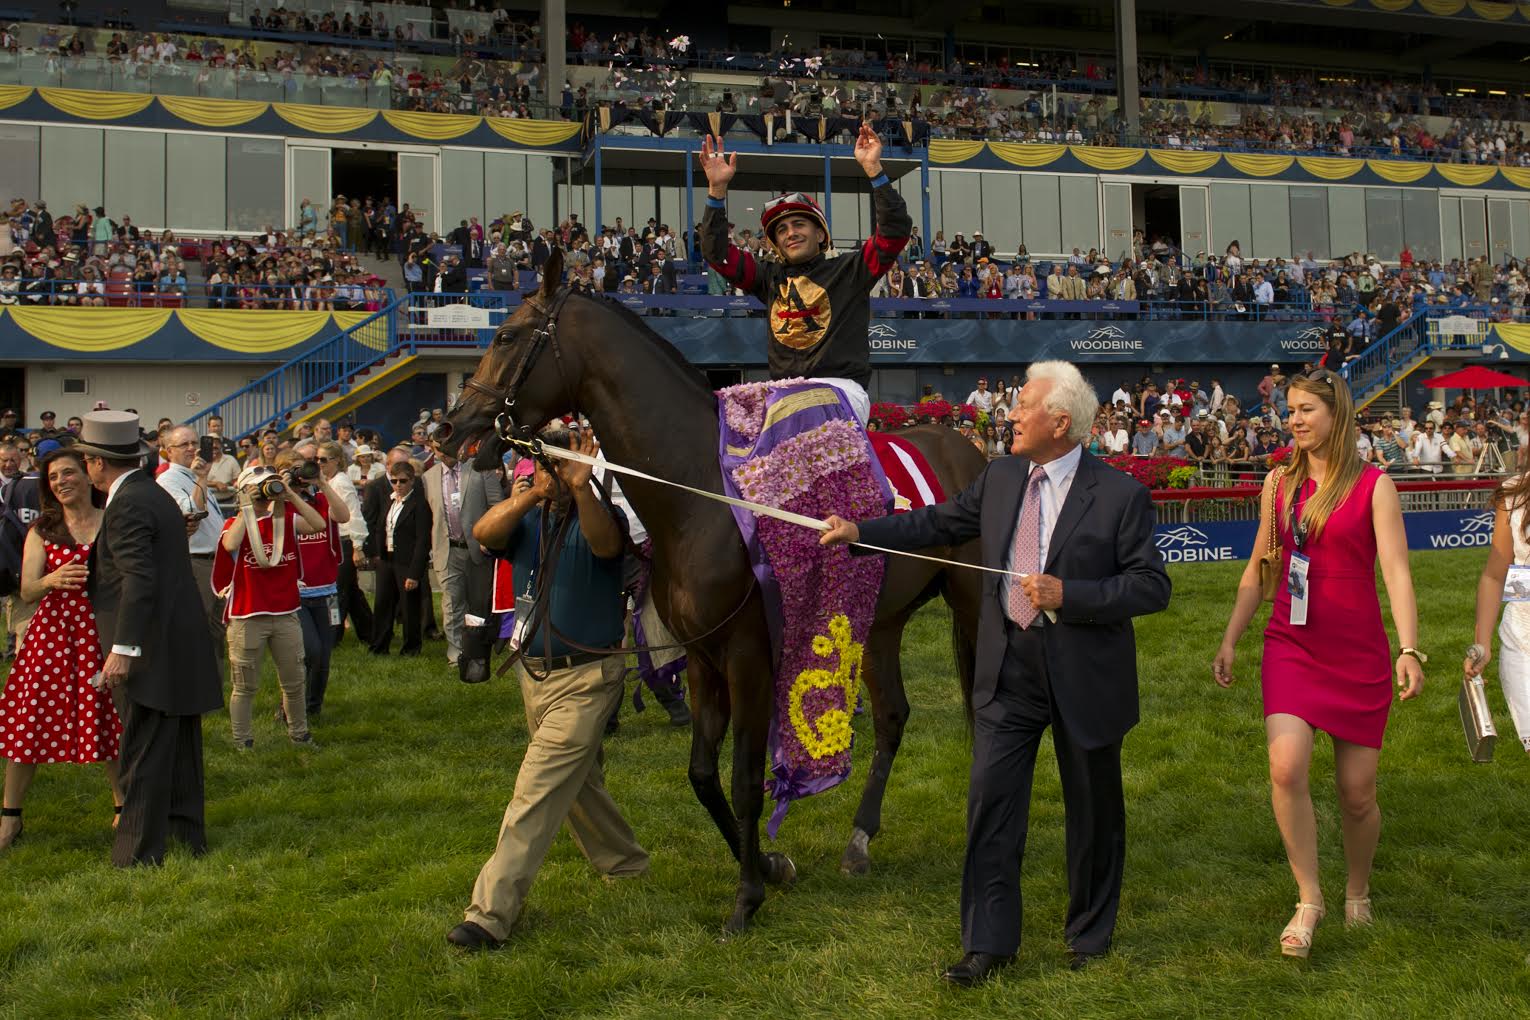 Winning the 2015 Queen’s Plate on Shaman Ghost: “That’s what opened the doors for me in Canada,” says Hernandez. Photo: Michael Burns Photography